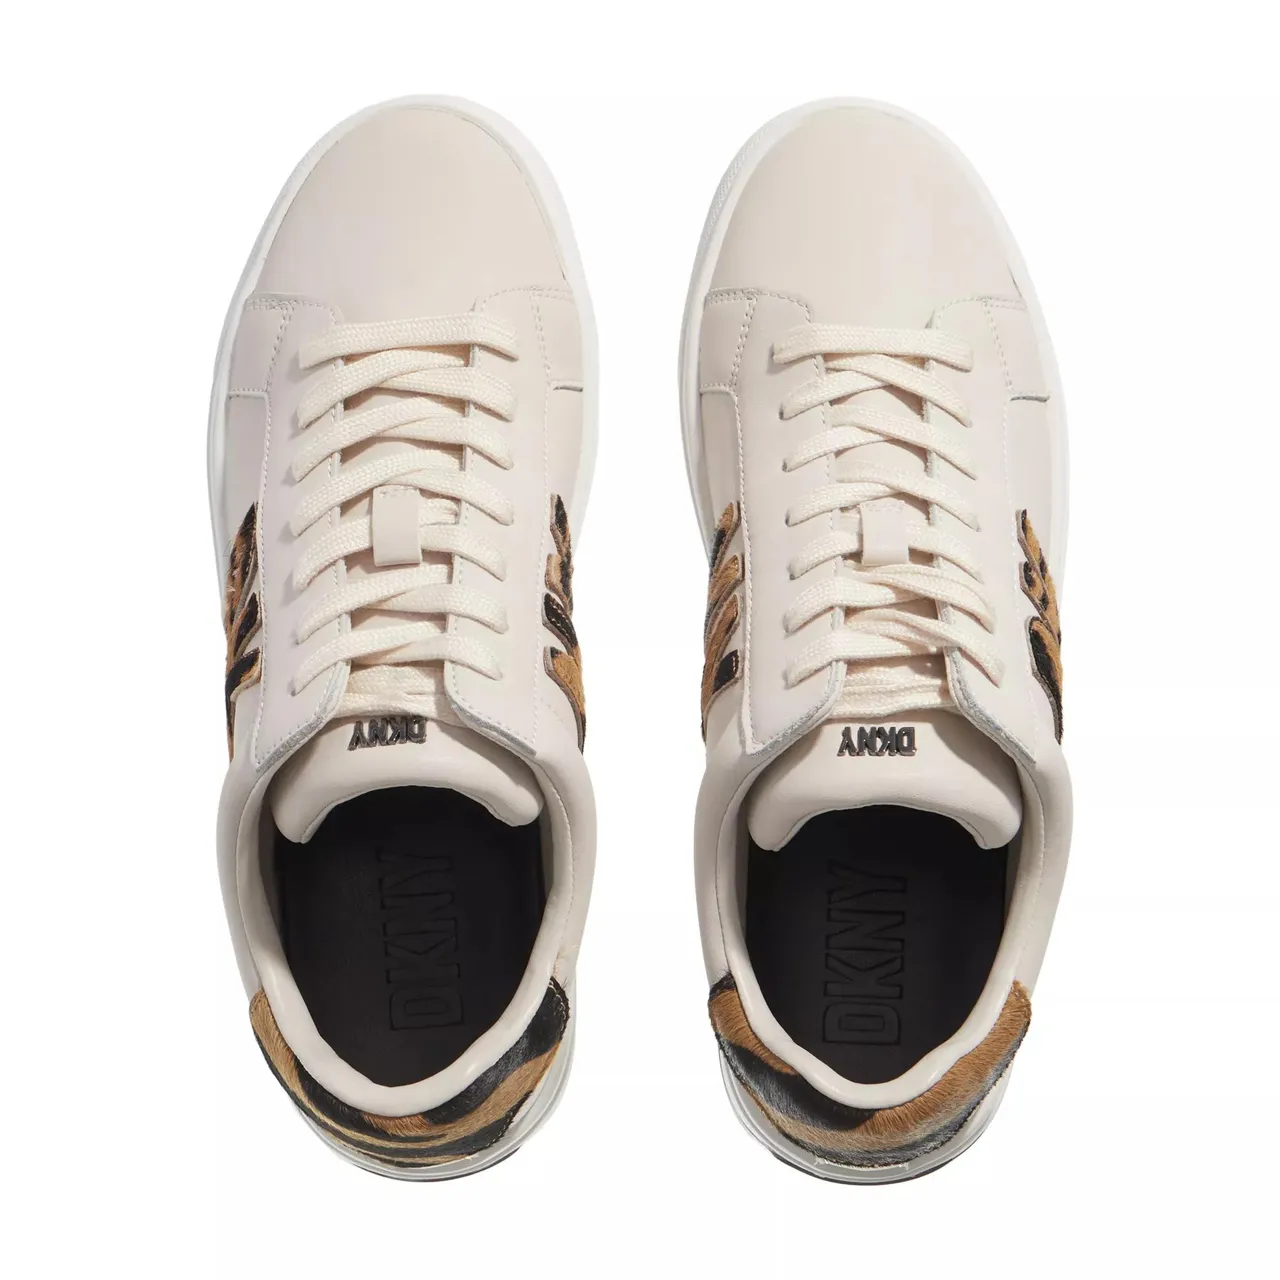 DKNY Sneakers - Abeni Lace Up Sneaker